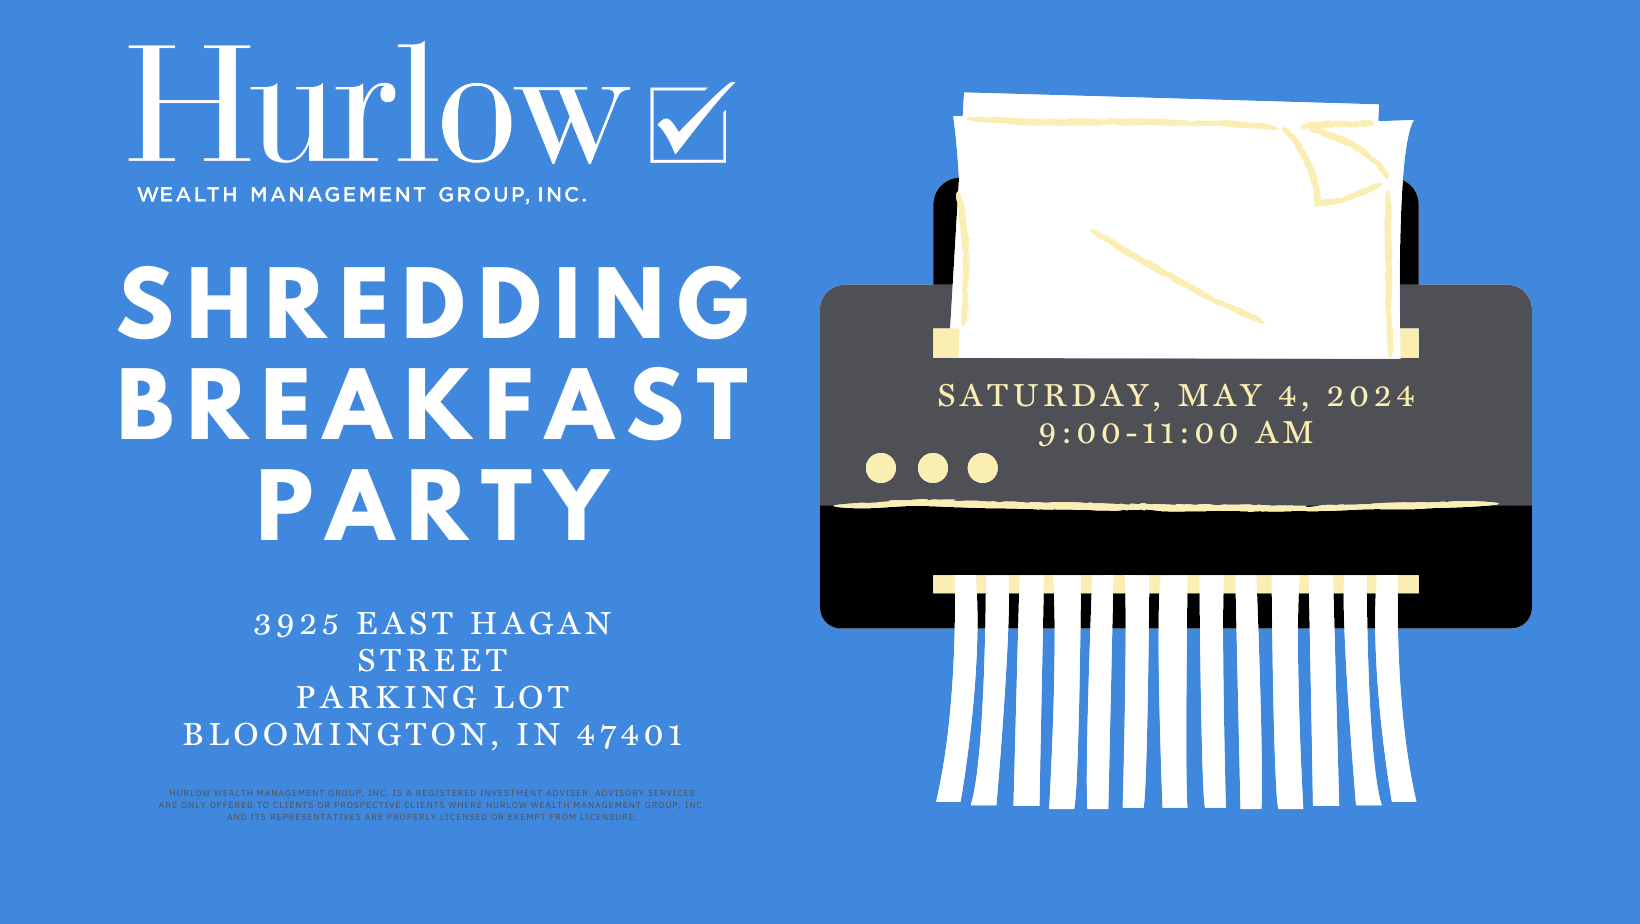 Event Promo Photo For HURLOW WEALTH - SHREDDING BREAKFAST PARTY